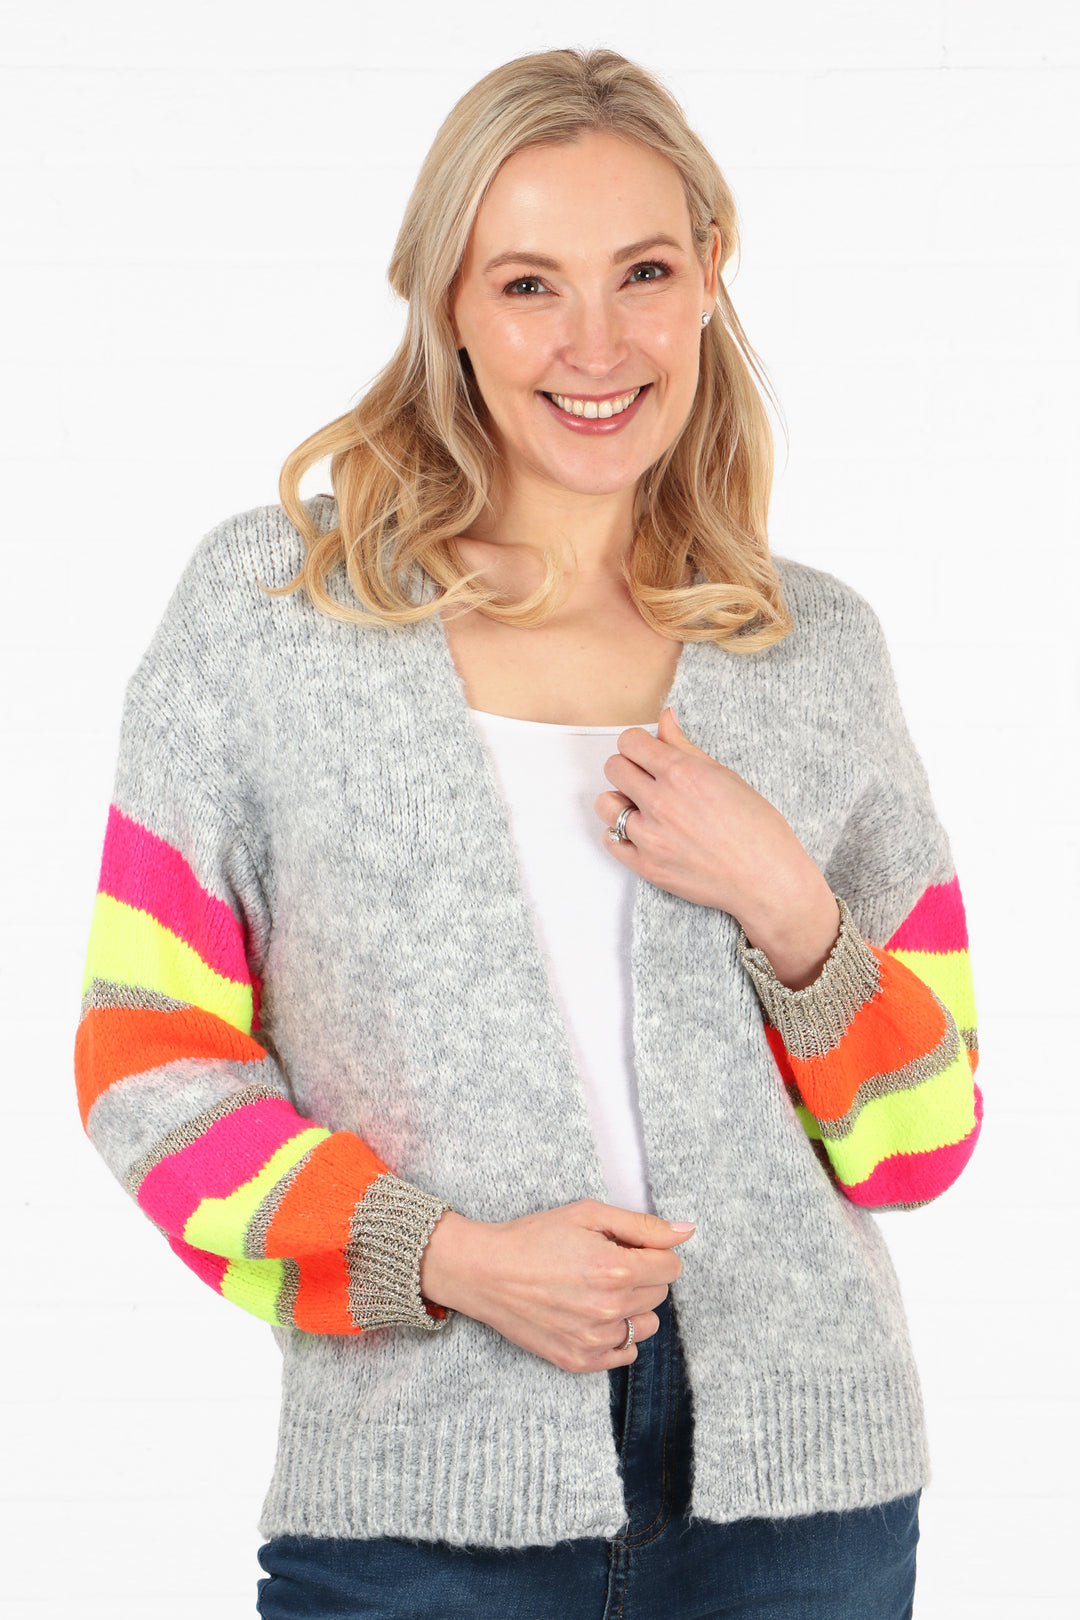 model wearing a grey open front knit cardigan with multicoloured striped sleeves. sleeves are pink, orange, neon yellow and gold glitter striped